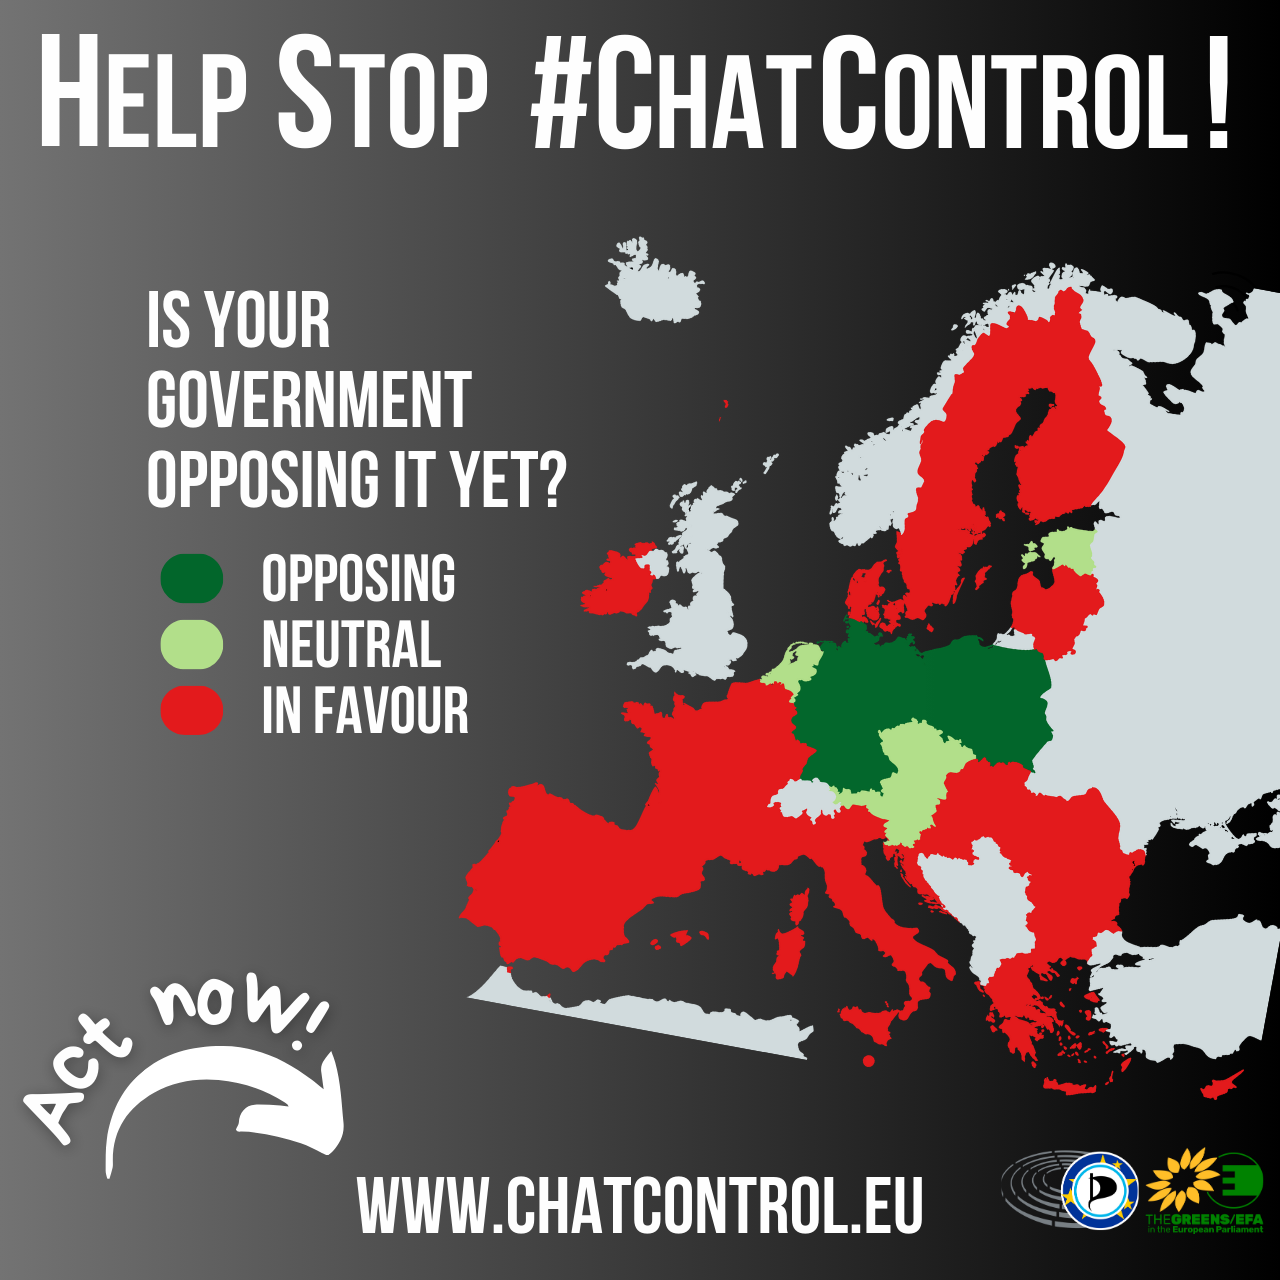 Sharepic showing a map of Europe. "Help Stop #ChatControl! Is your government opposing yet?" Showing most of the EU coloured in red, for "in favour" of chatcontrol. "Act now! www.chatcontrol.eu" and the logo of the European Pirates and the Greens Group of the European Parliament.